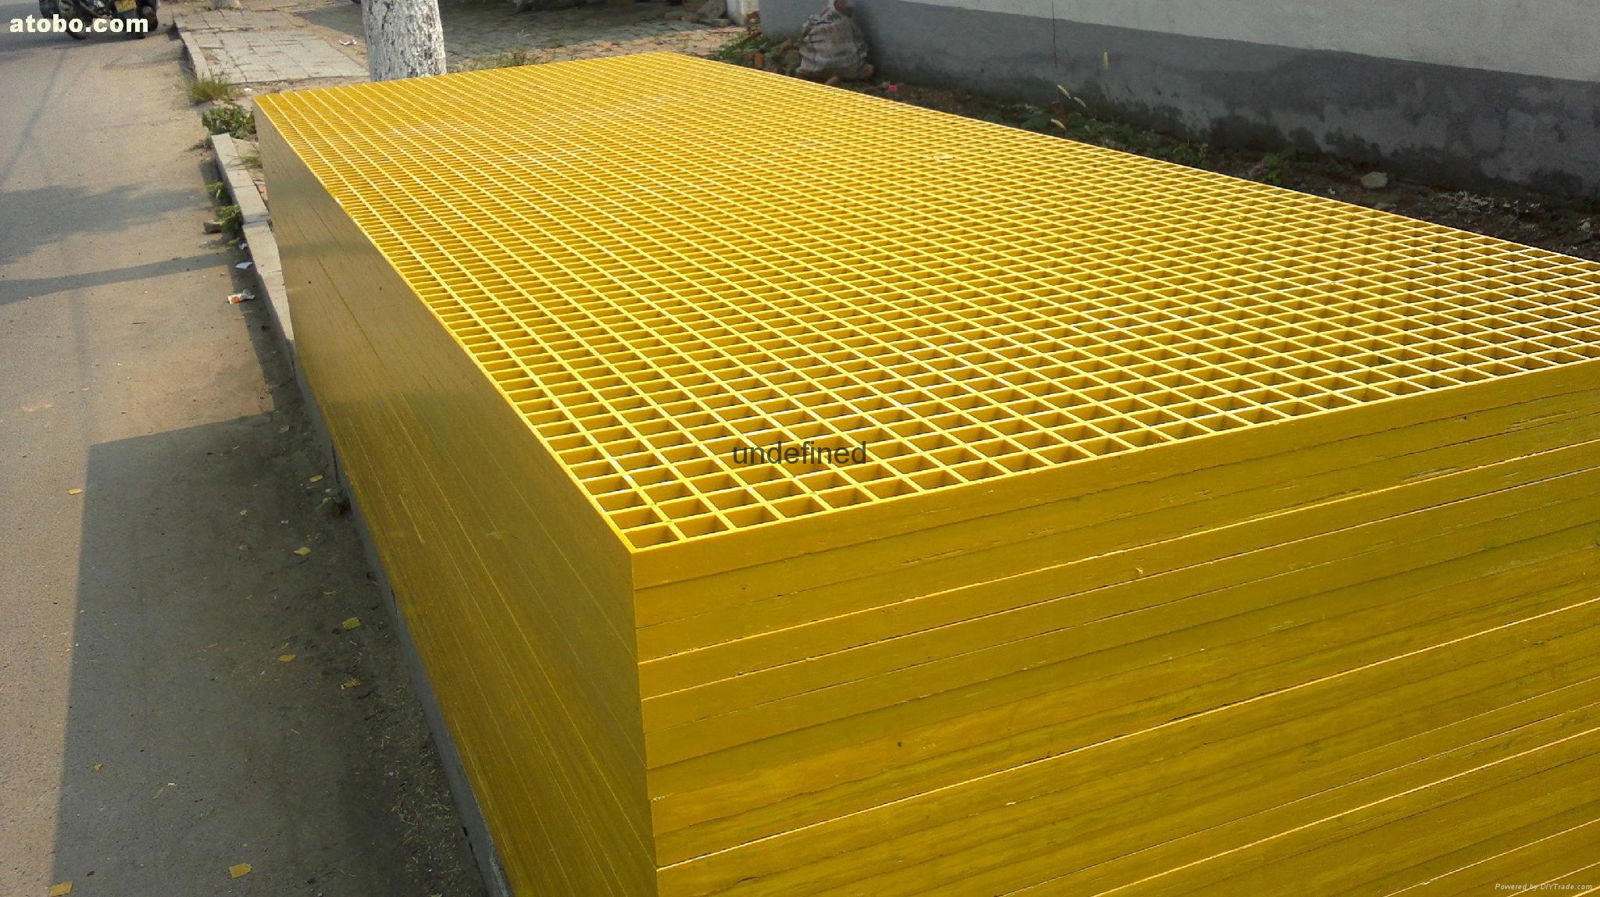 DURABLE , CONVENIENT Frp grating for frp tree pool cover 3